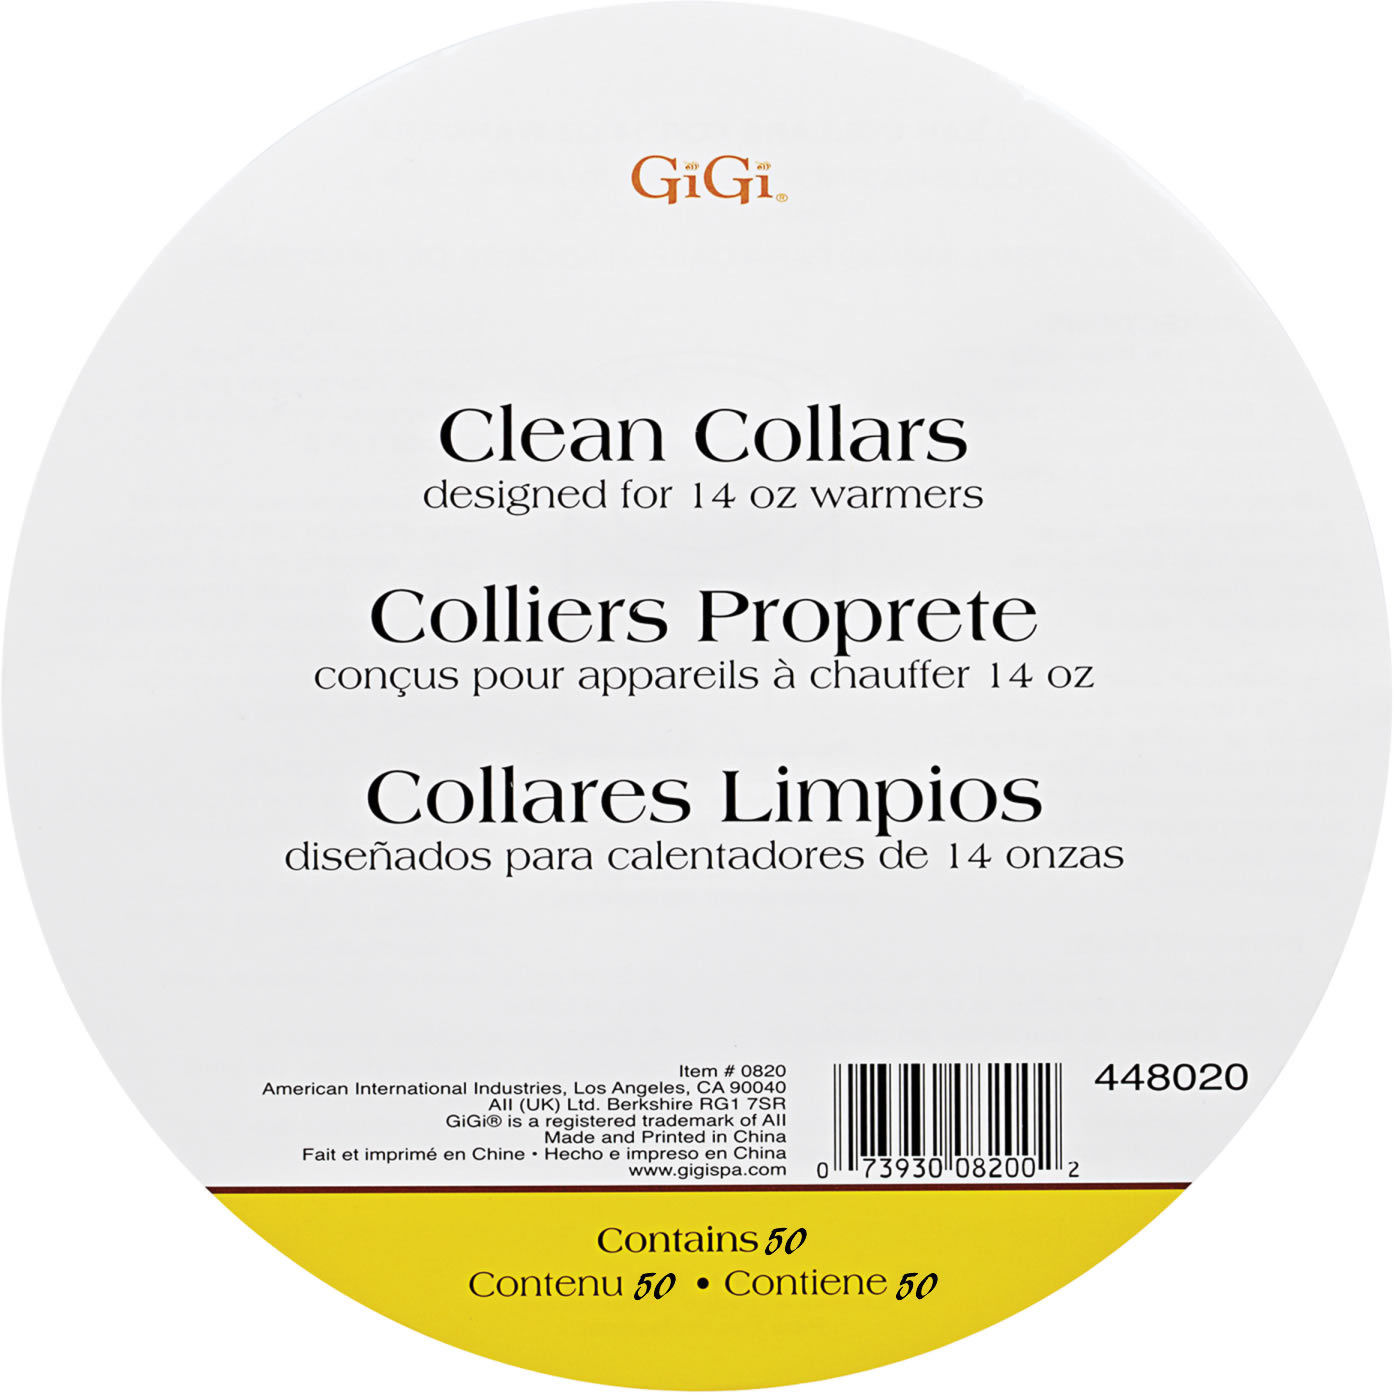 GIGI - 50 Packs of Collars for wax warmers for 14oz cans